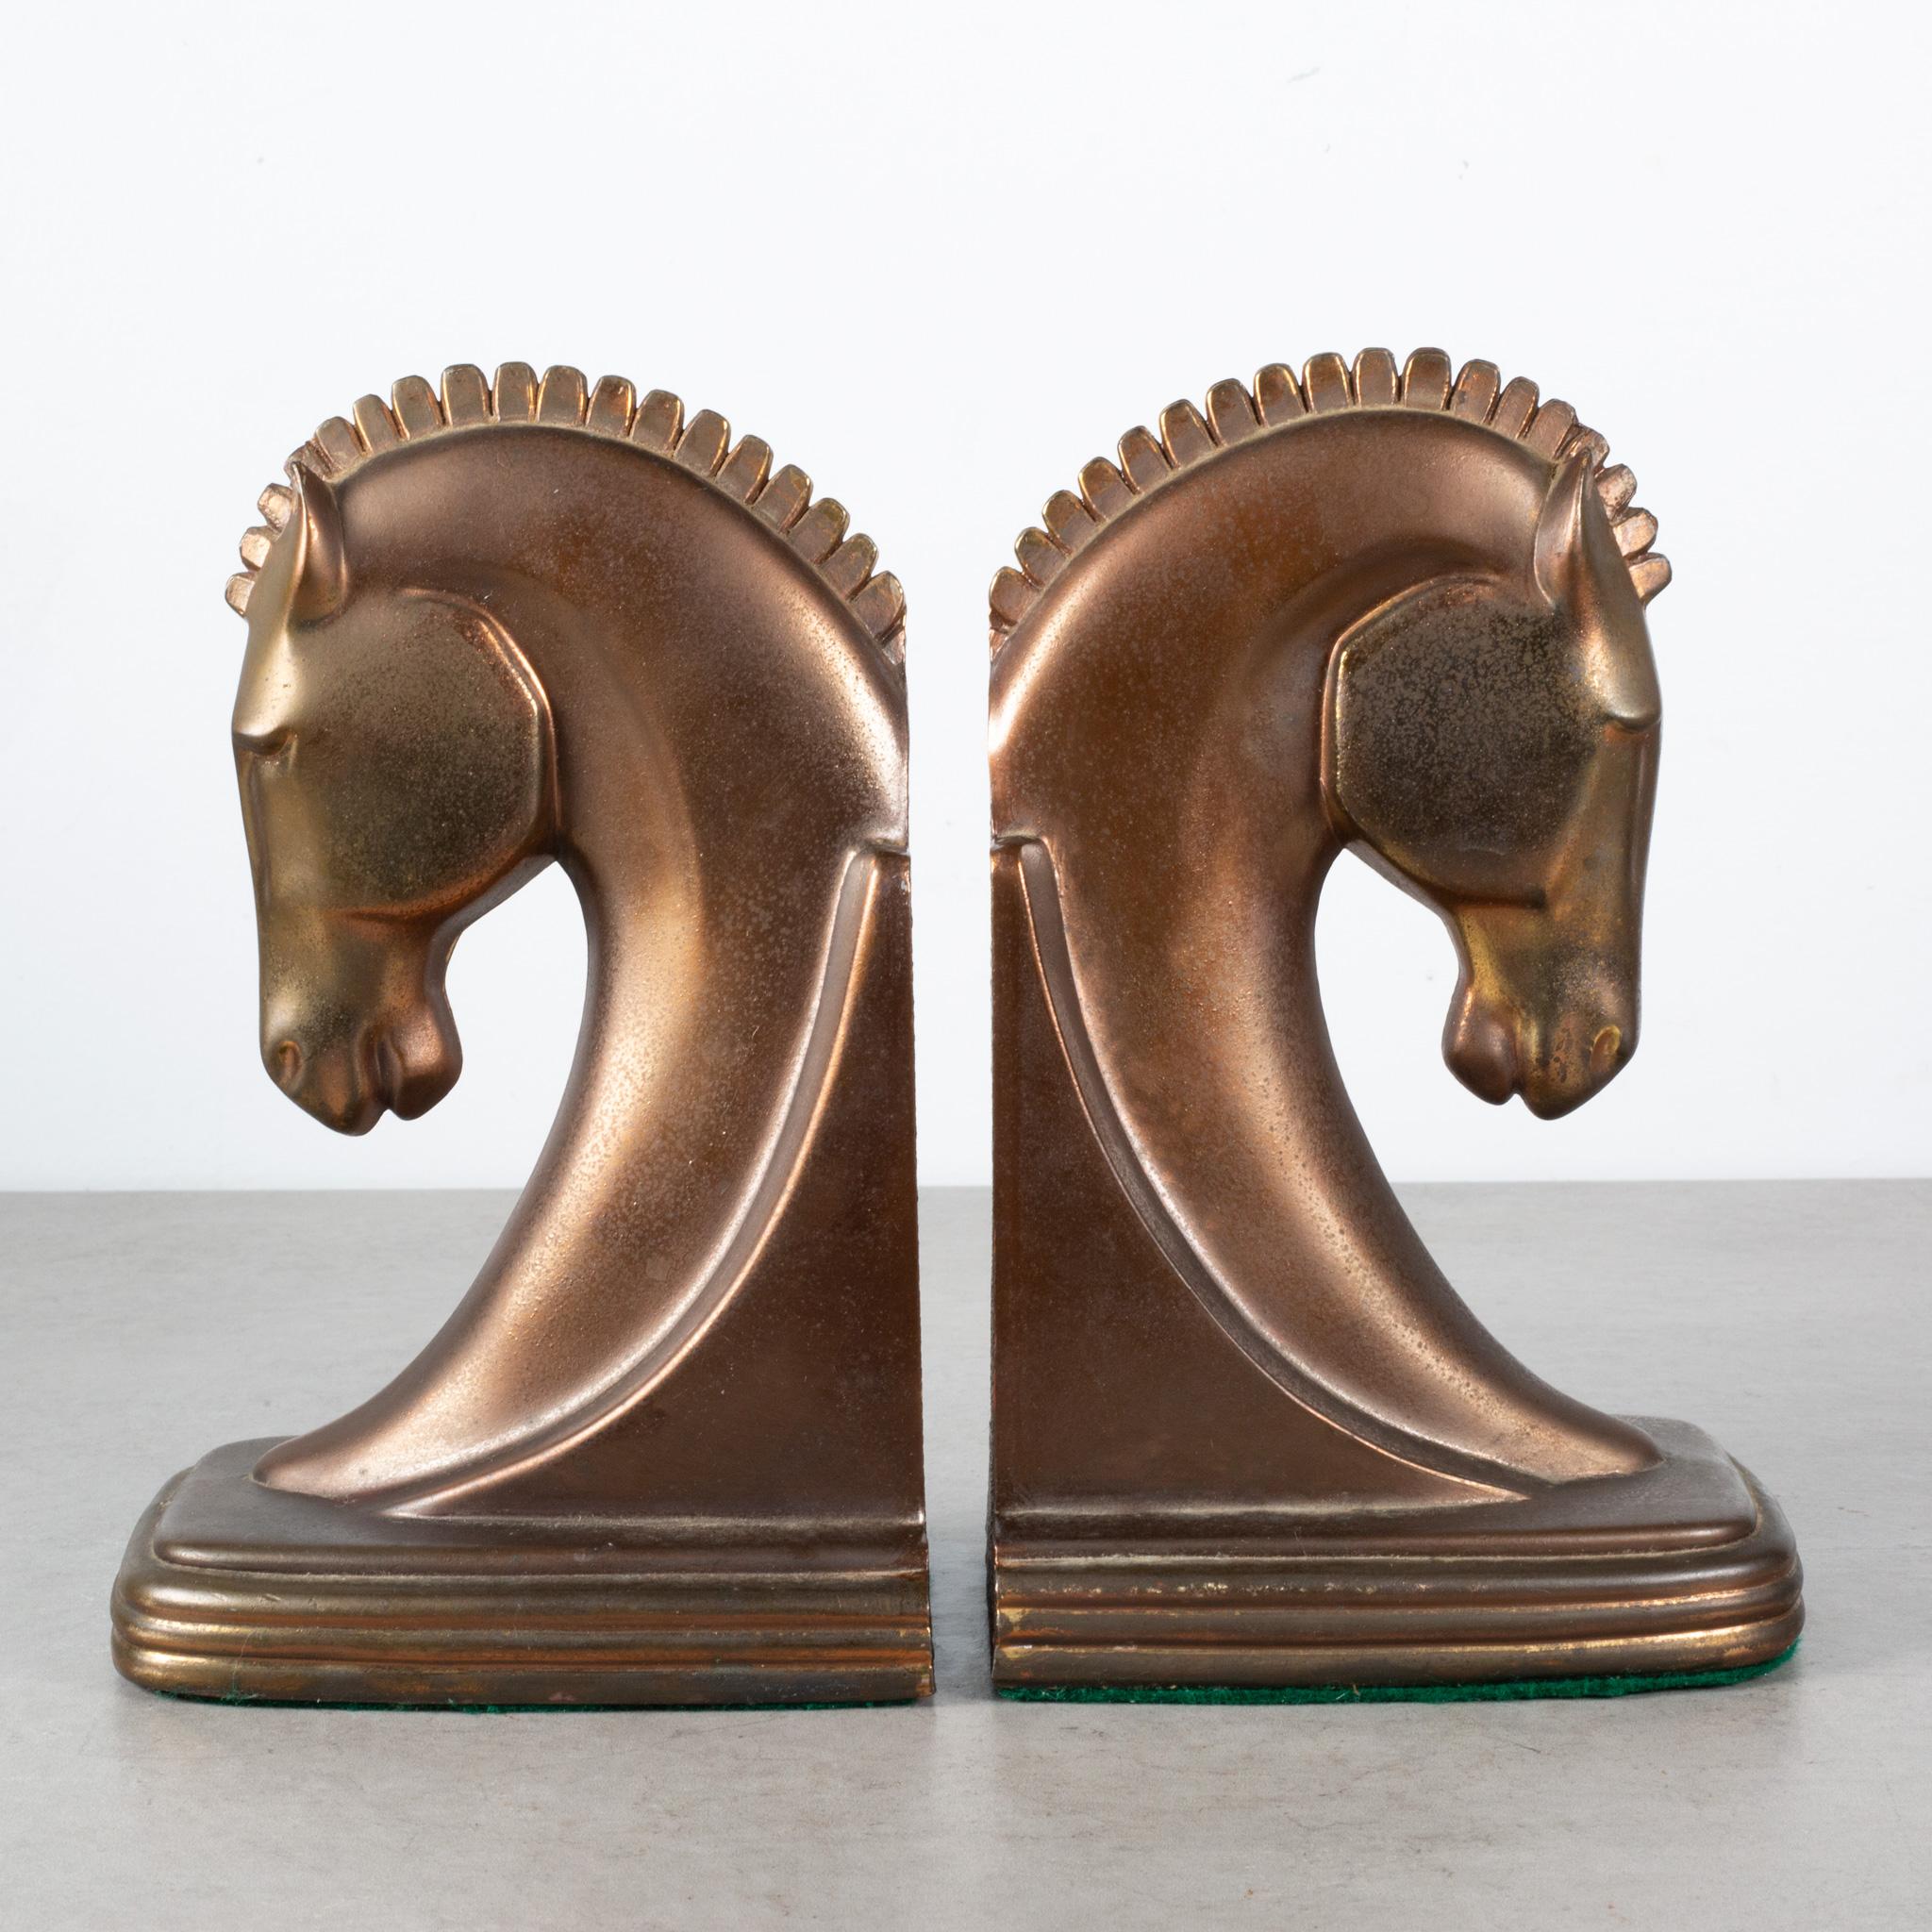 Plated Bronze Machine Age Trojan Horse Bookends by Dodge Inc. C.1930  (FREE SHIPPING)